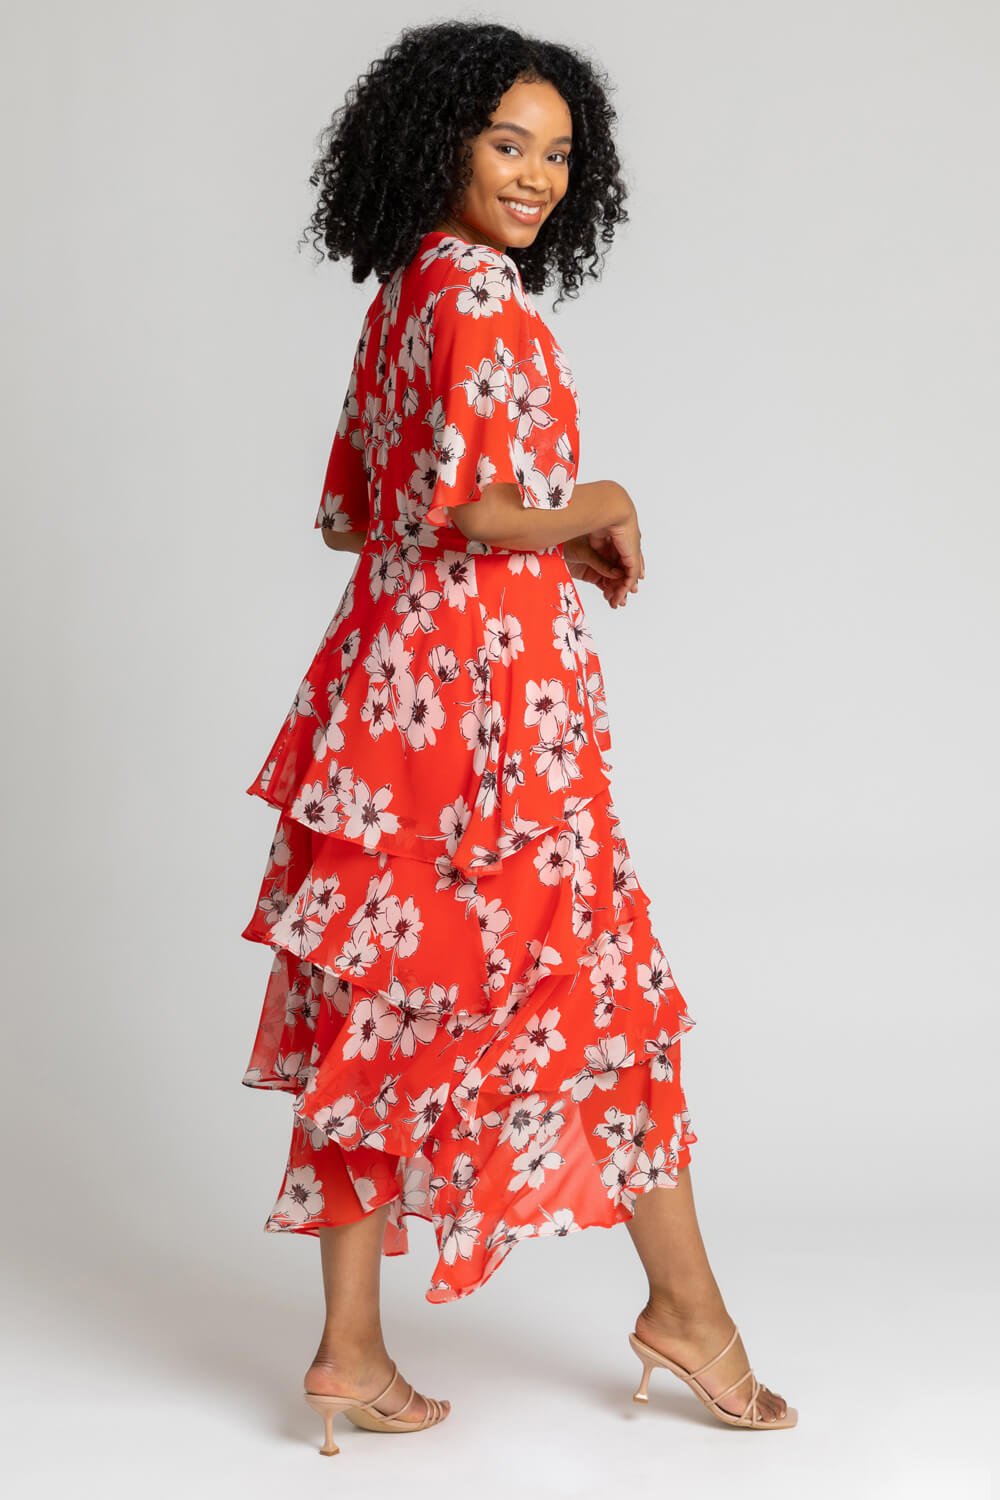 Red Petite Floral Print Tiered Frill Dress, Image 2 of 5